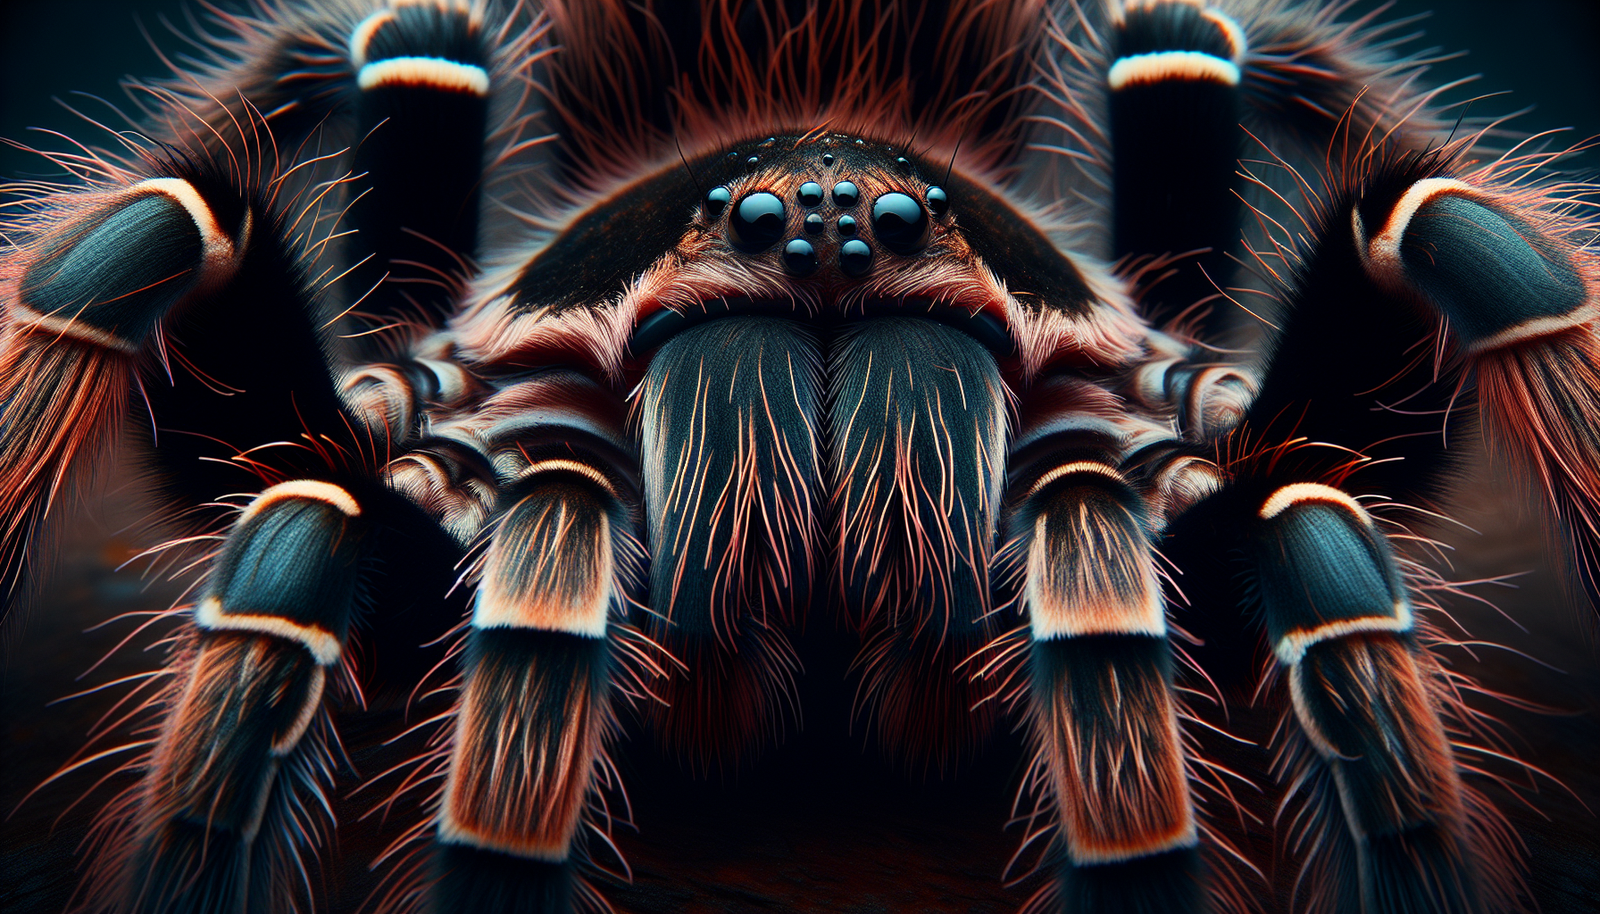 Can You Recommend Some Rare And Lesser-known Tarantula Species For Exotic Pet Enthusiasts?